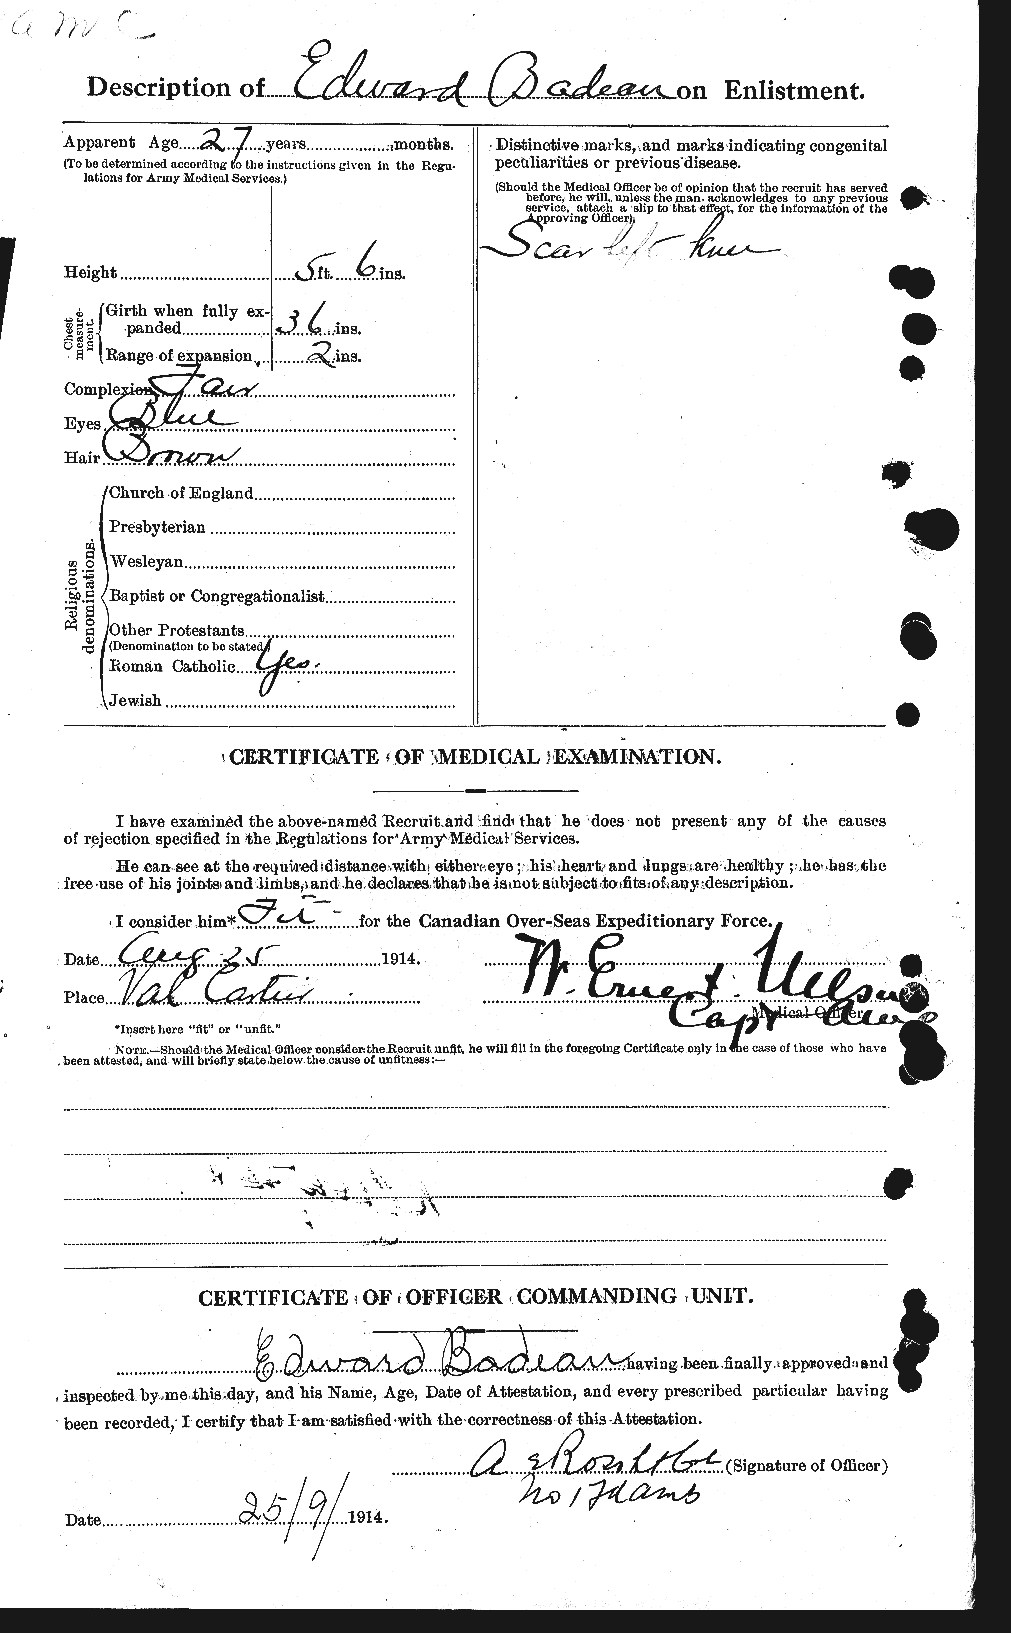 Personnel Records of the First World War - CEF 217795b